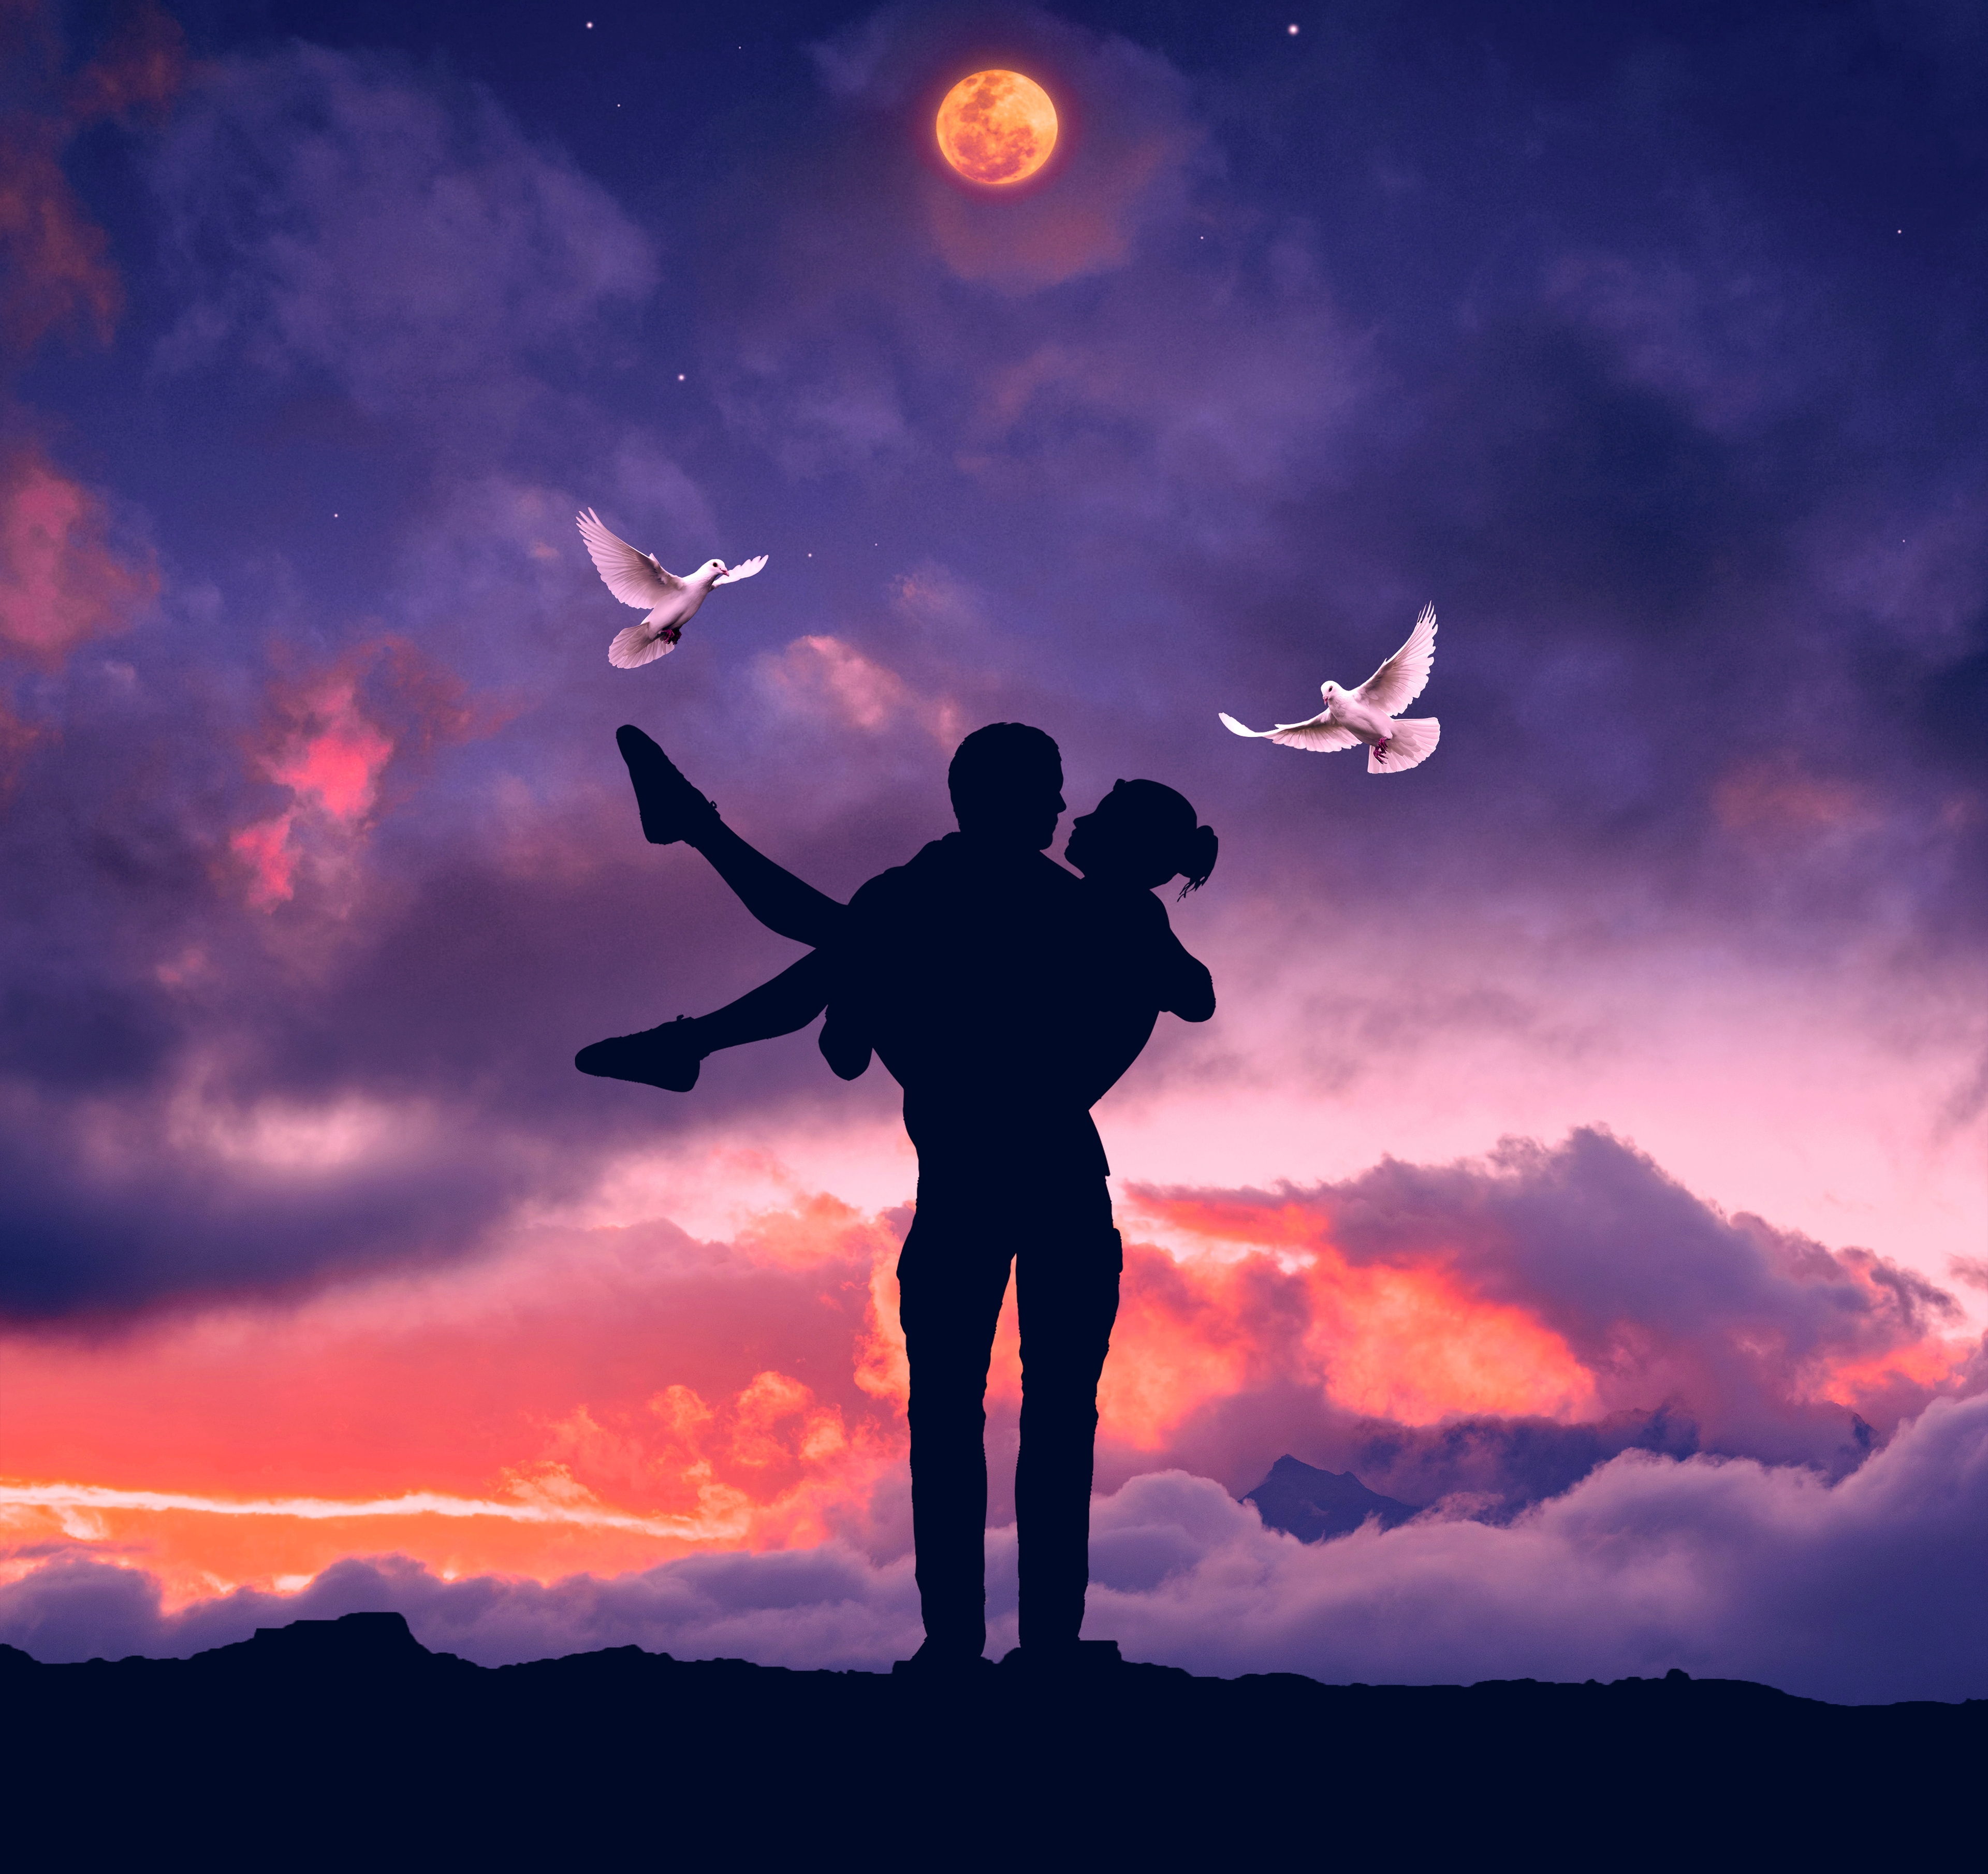 HD wallpaper, Lifting, Love Birds, Silhouette, Sunset, Romantic, White Pigeons, Couple, Moon, Surreal